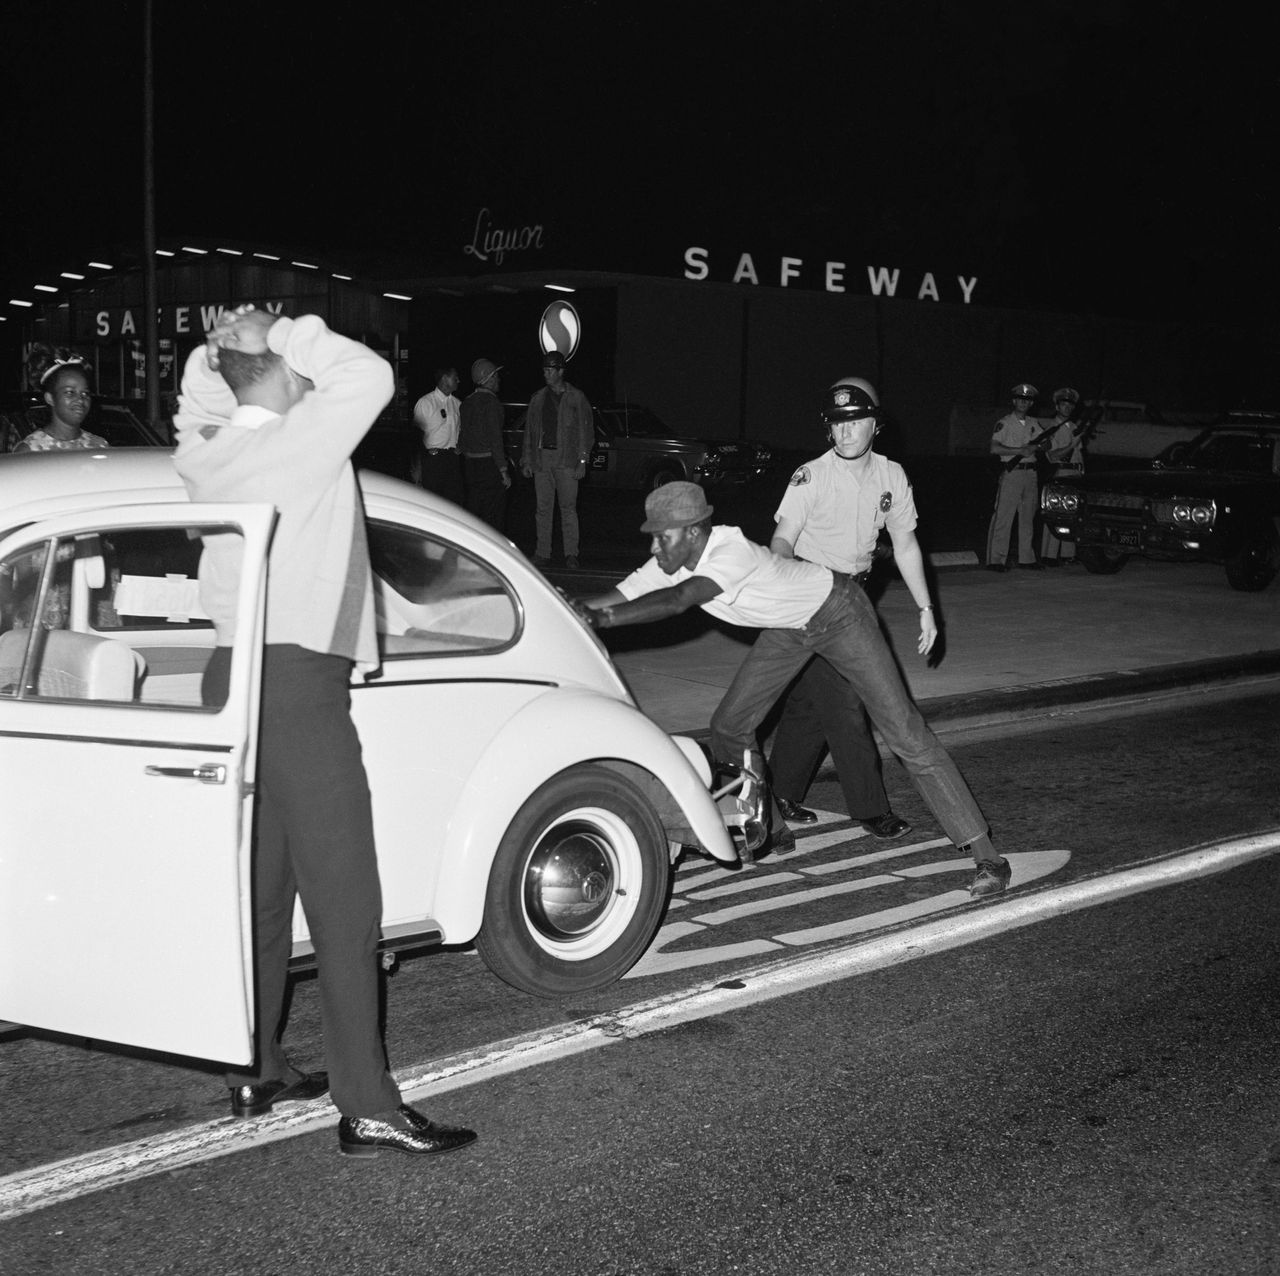 A Long Beach police officer searches black drivers and passengers for weapons at a checkpoint during the Watts Rebellion in nearby Los Angeles.